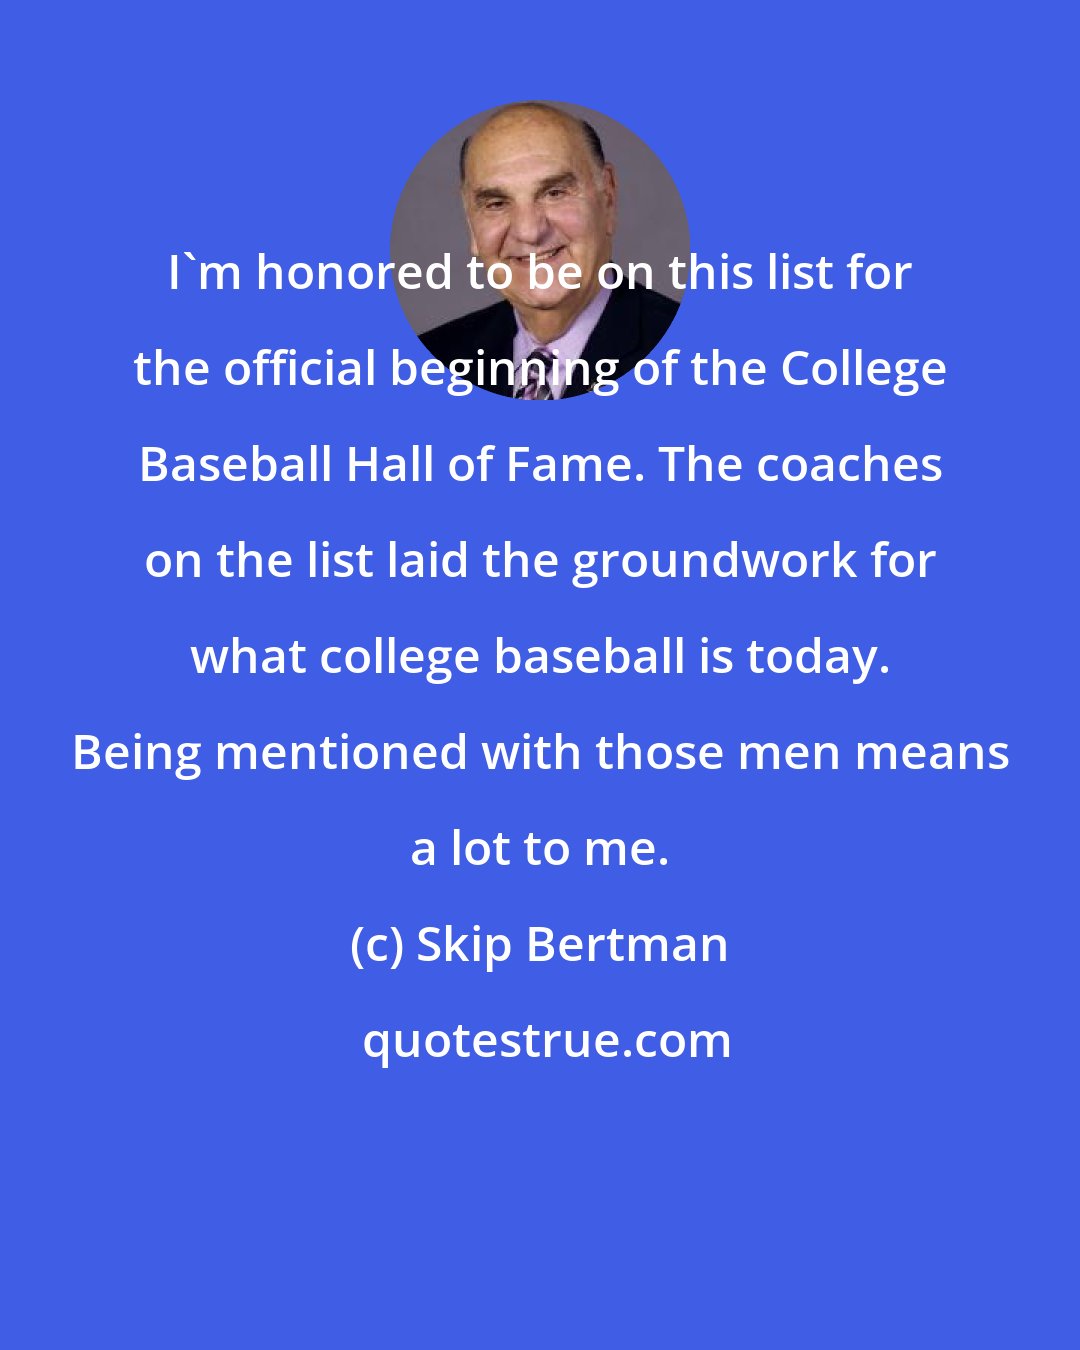 Skip Bertman: I'm honored to be on this list for the official beginning of the College Baseball Hall of Fame. The coaches on the list laid the groundwork for what college baseball is today. Being mentioned with those men means a lot to me.